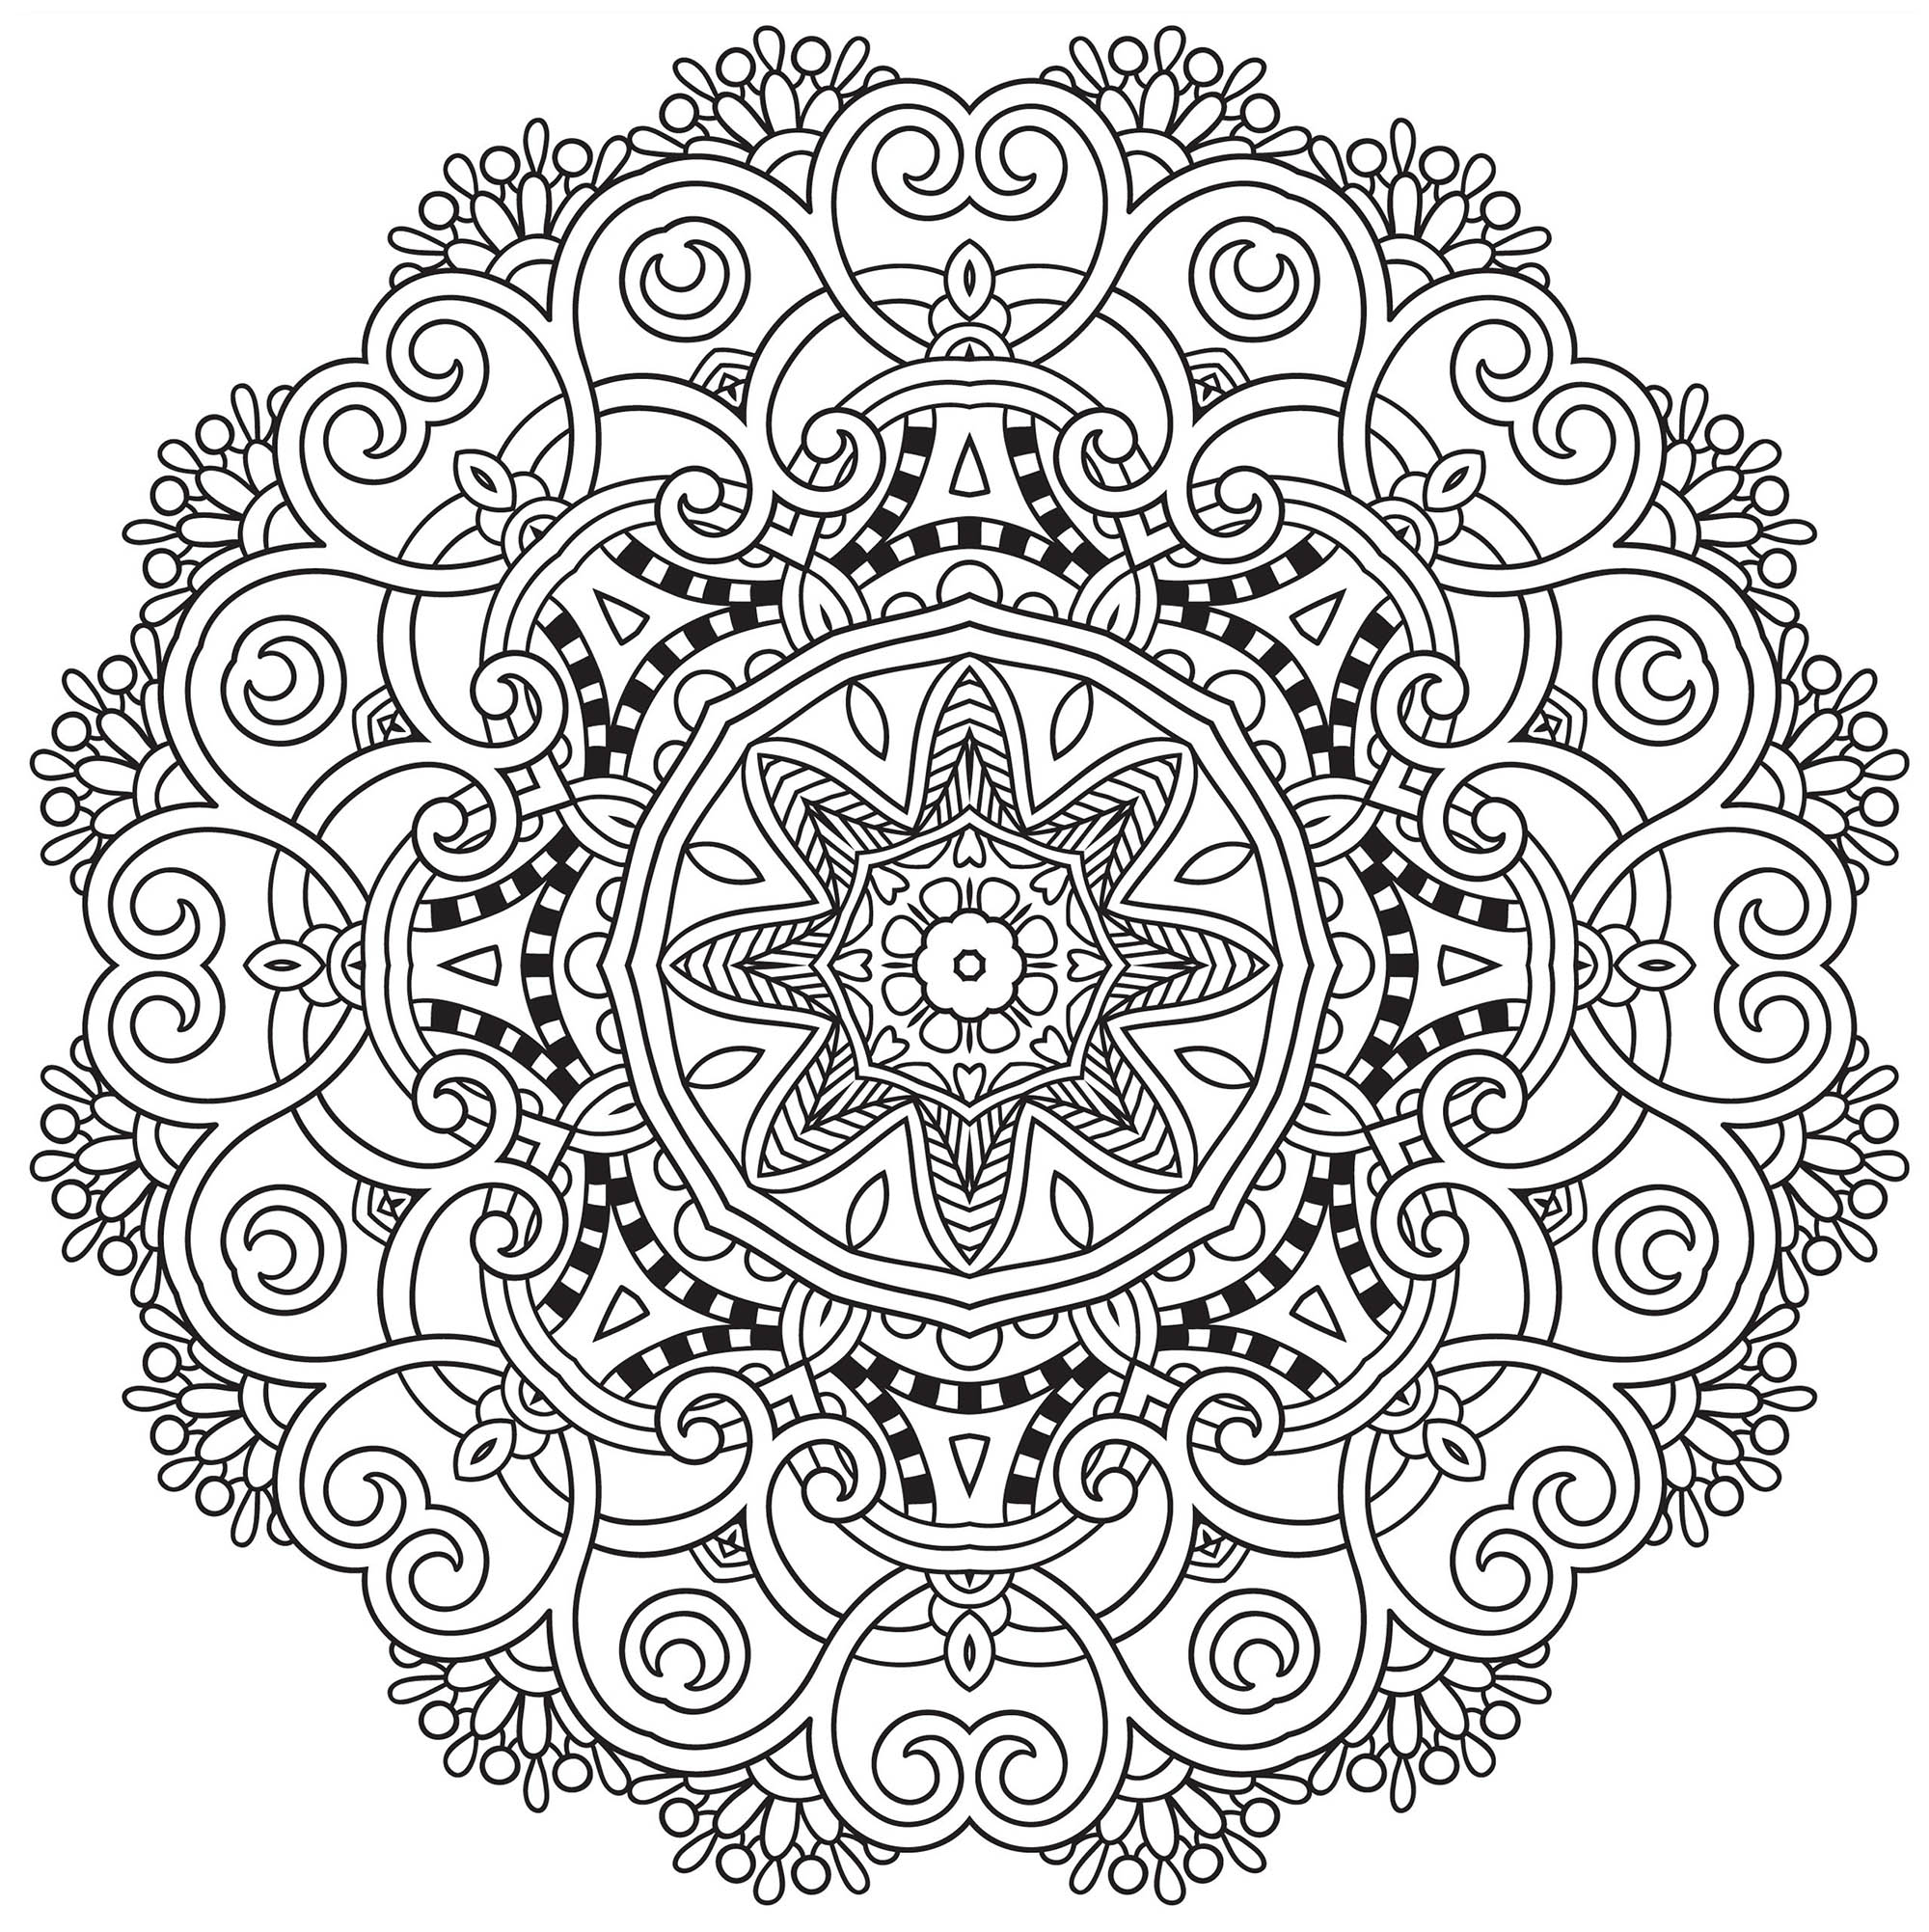 Download Mandala to download in pdf 2 - M&alas Adult Coloring Pages ...